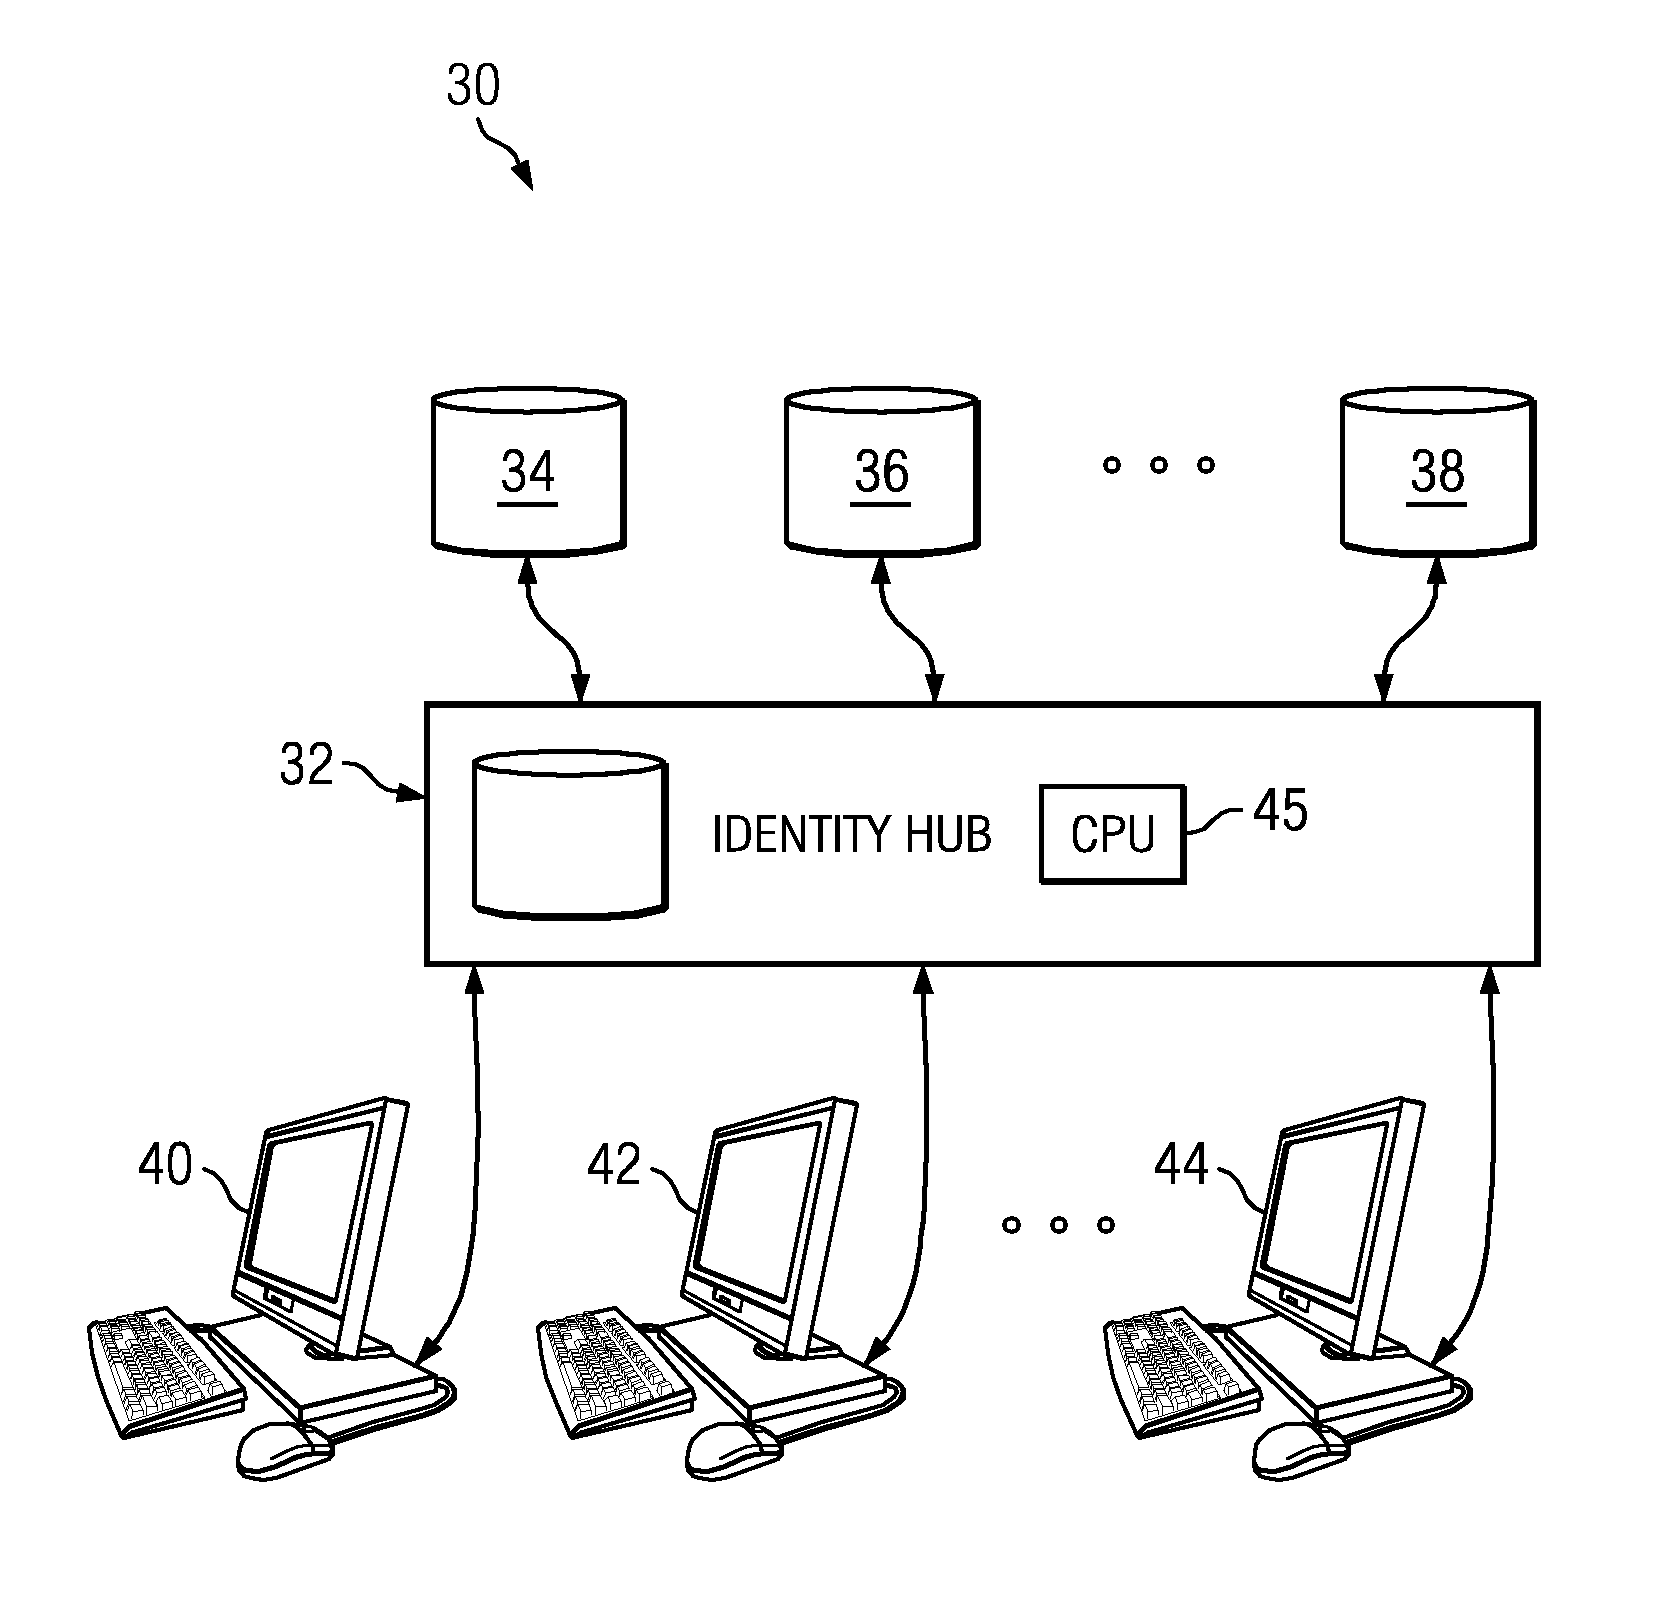 Method and system for comparing attributes such as business names